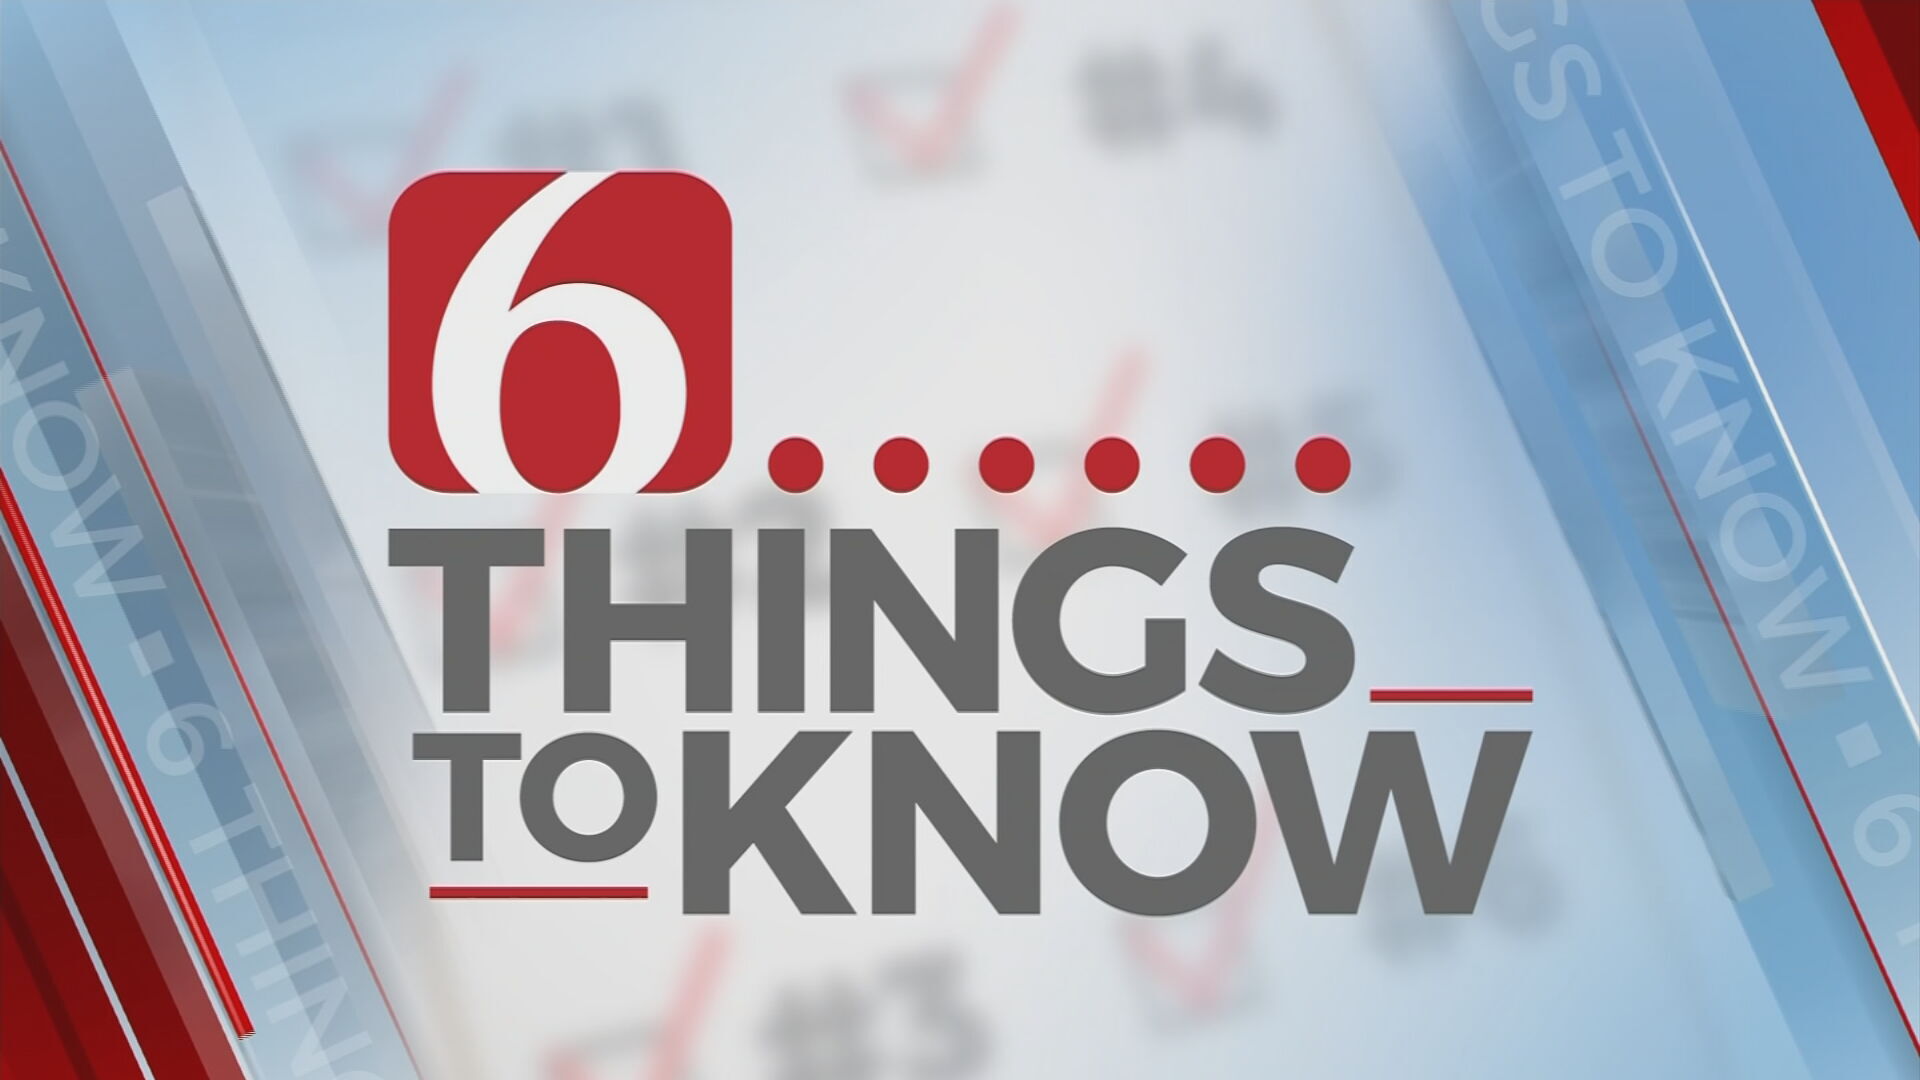 6 Things To Know (Oct 31): Last Day Of Early Voting & Halloween Happenings 